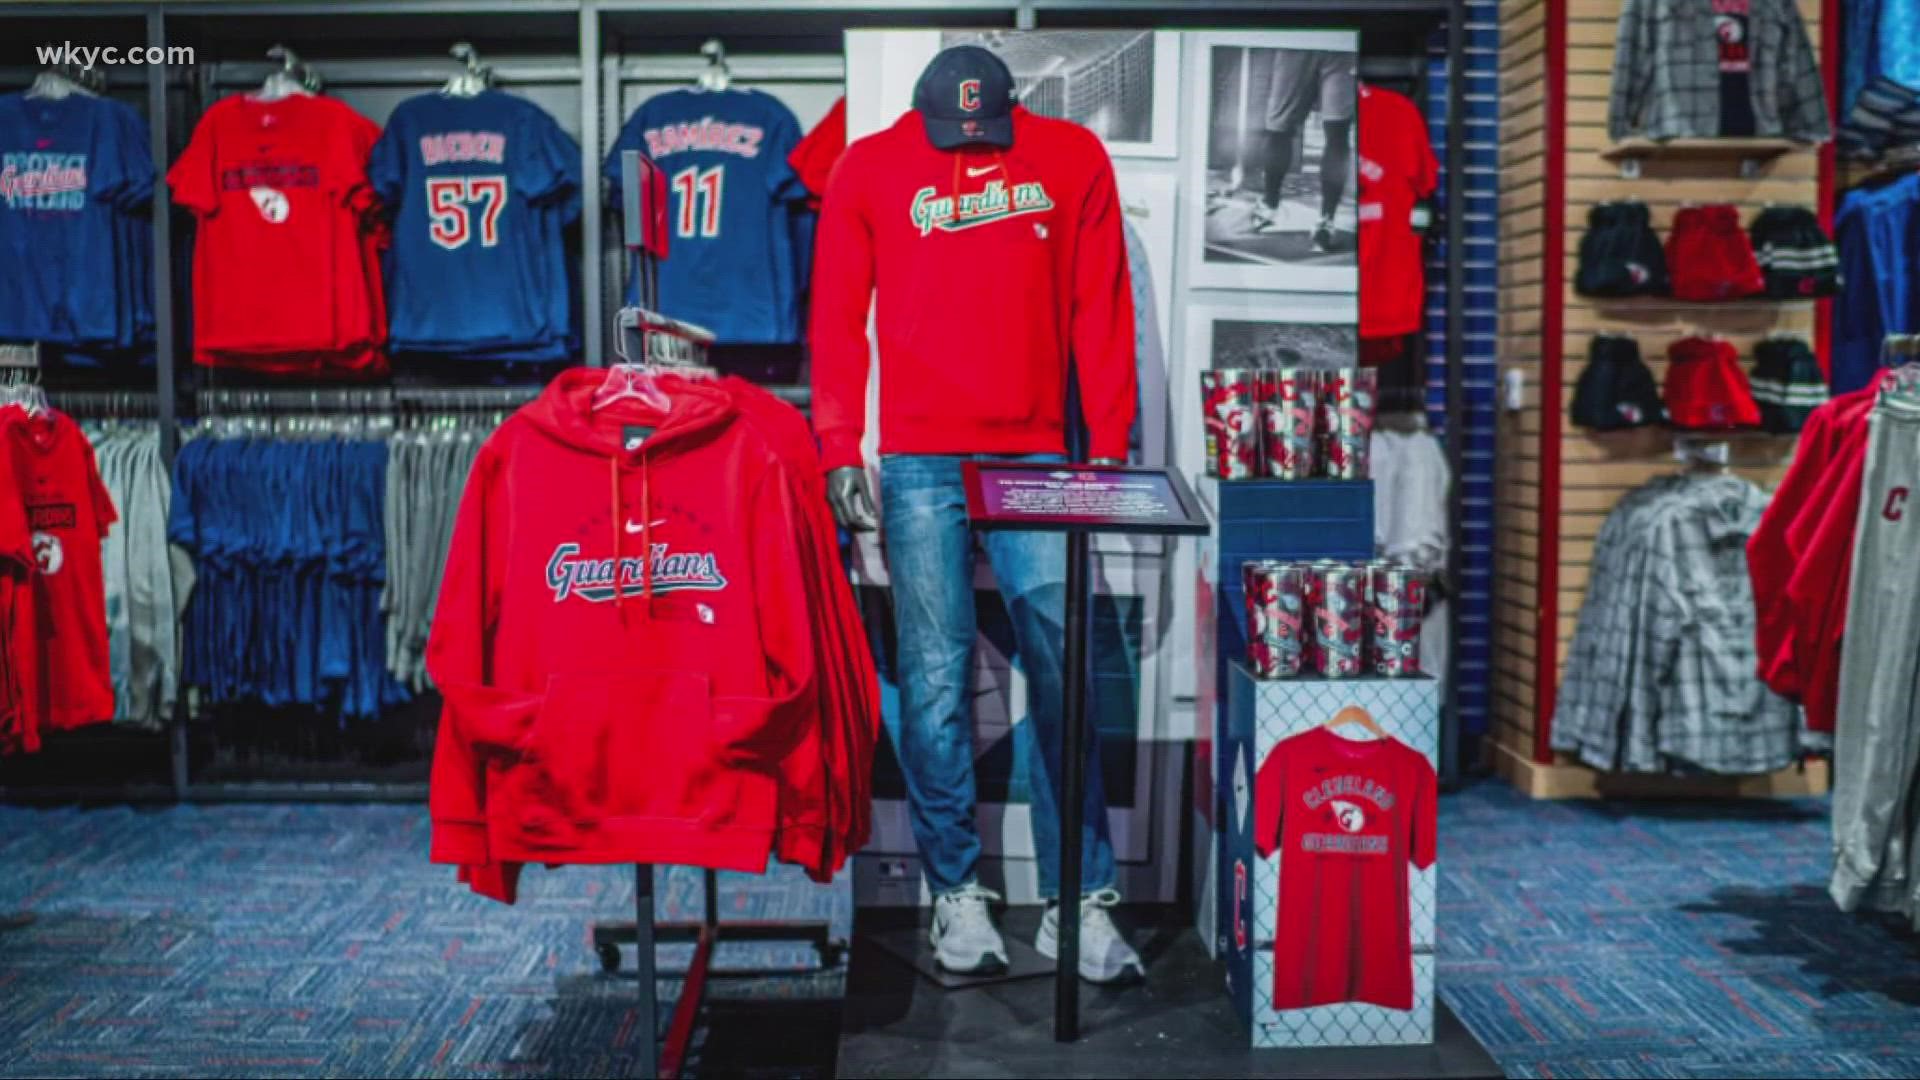 Why you may want to hang on to your old Indians gear